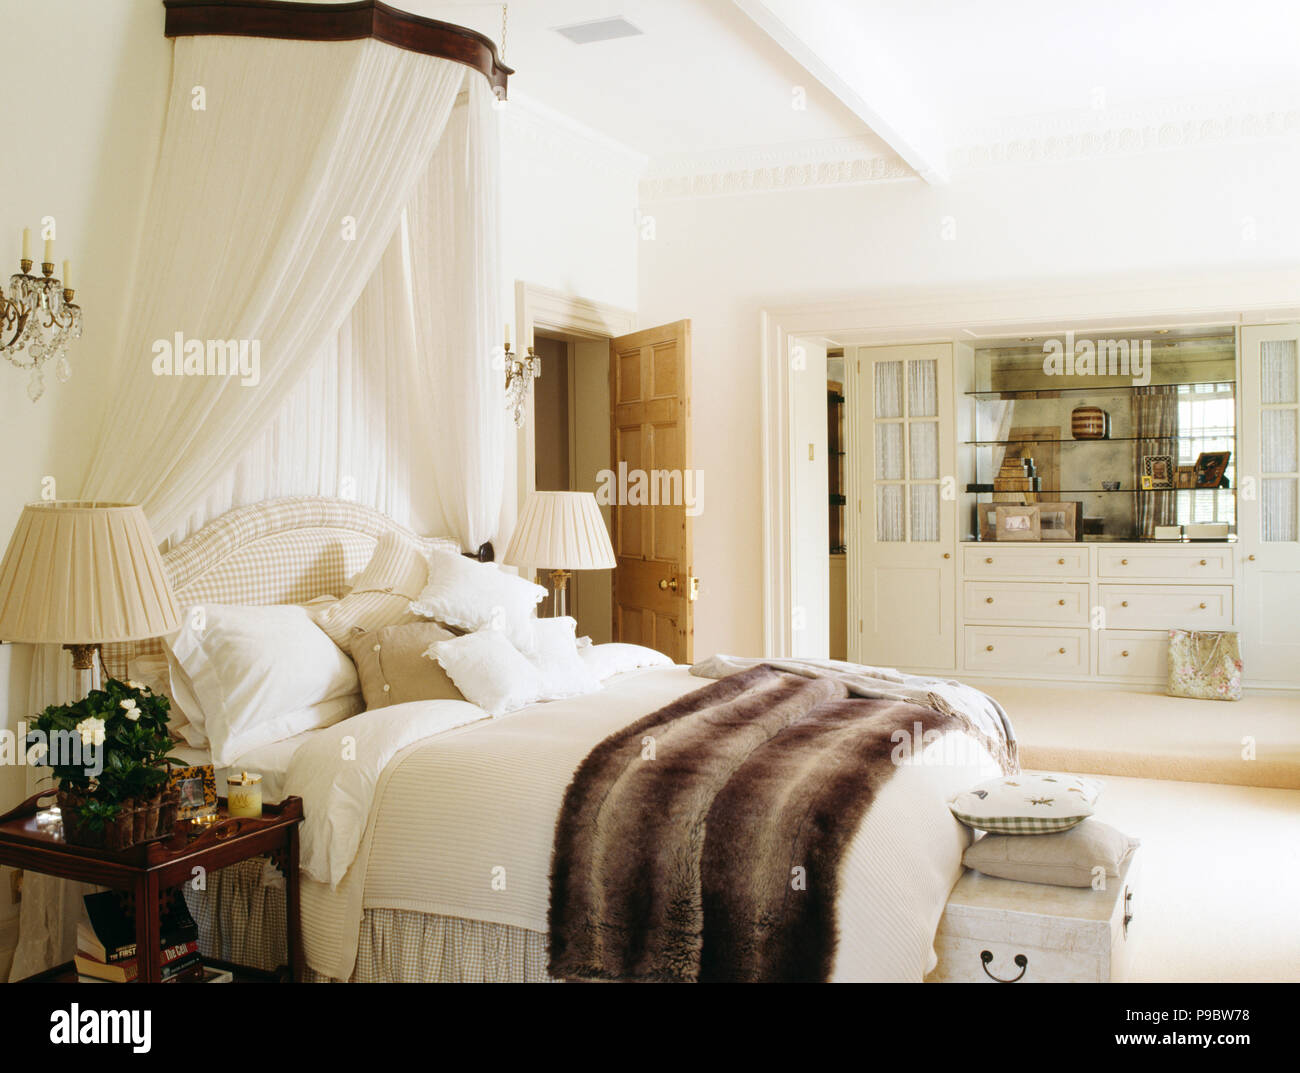 Coronet with white drapes above bed with faux fur throw Stock Photo